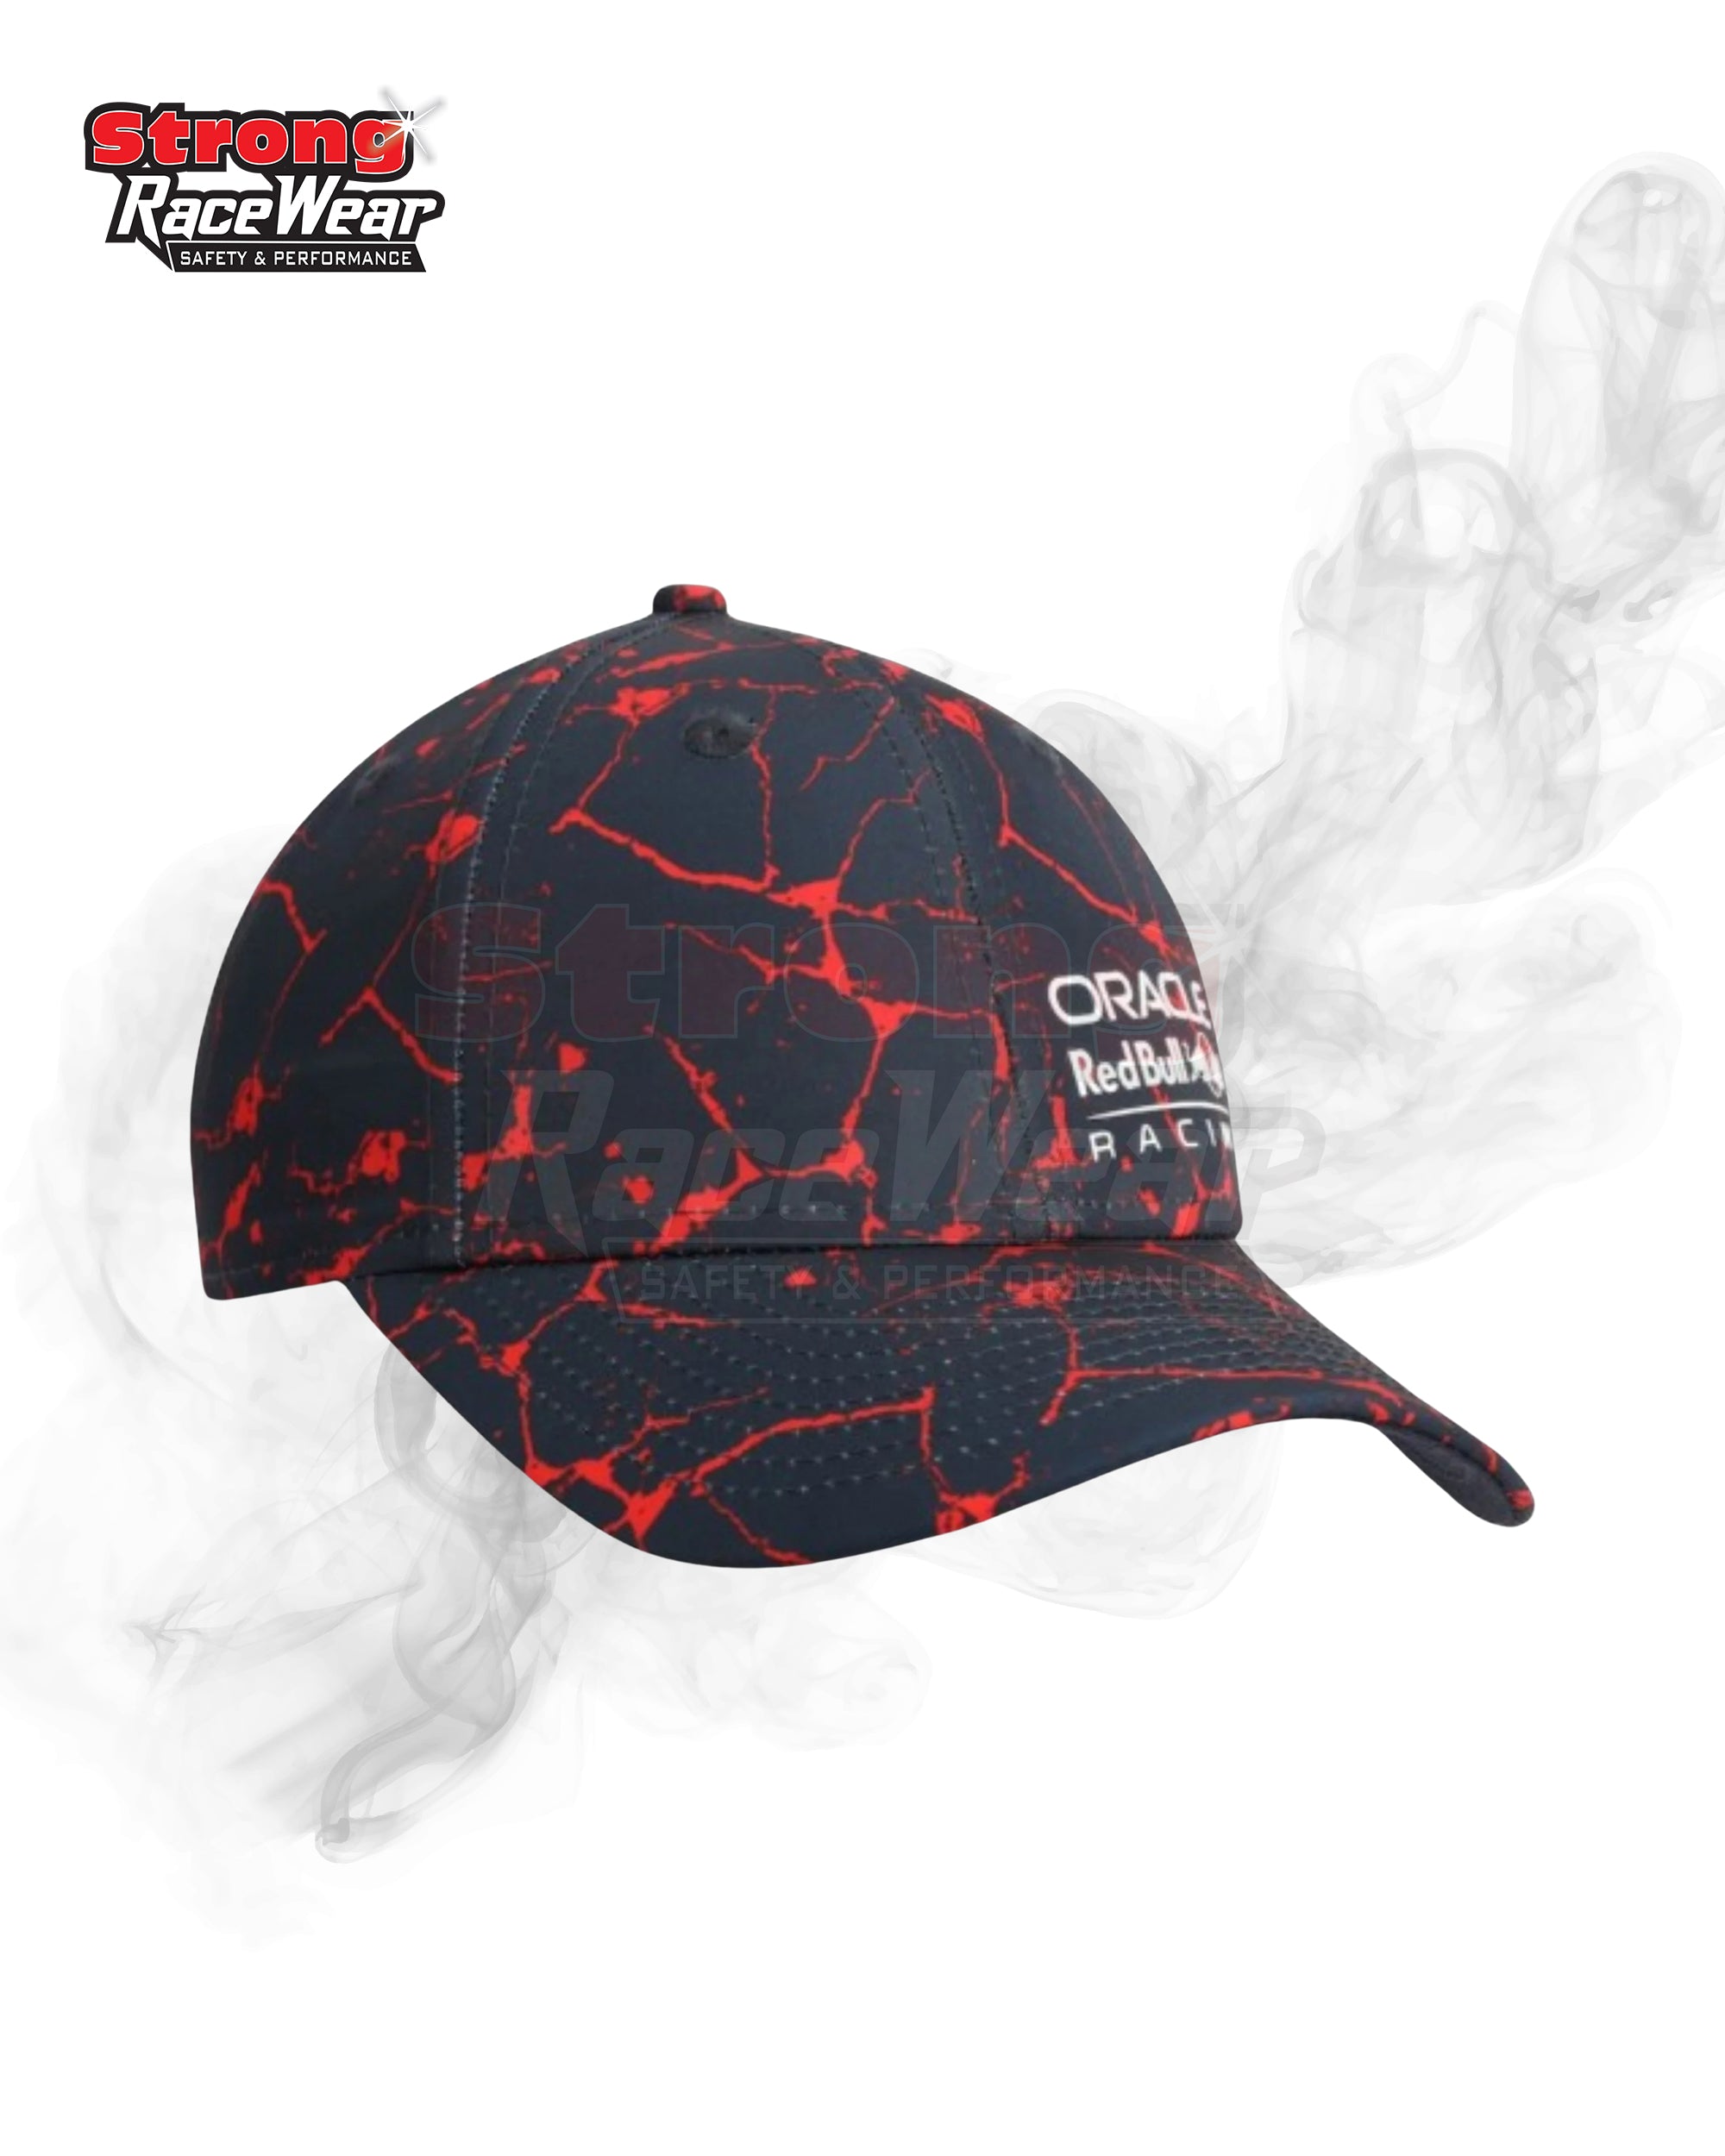 Oracle Red Bull Racing New Era All Over Print 9Forty Cap Kids